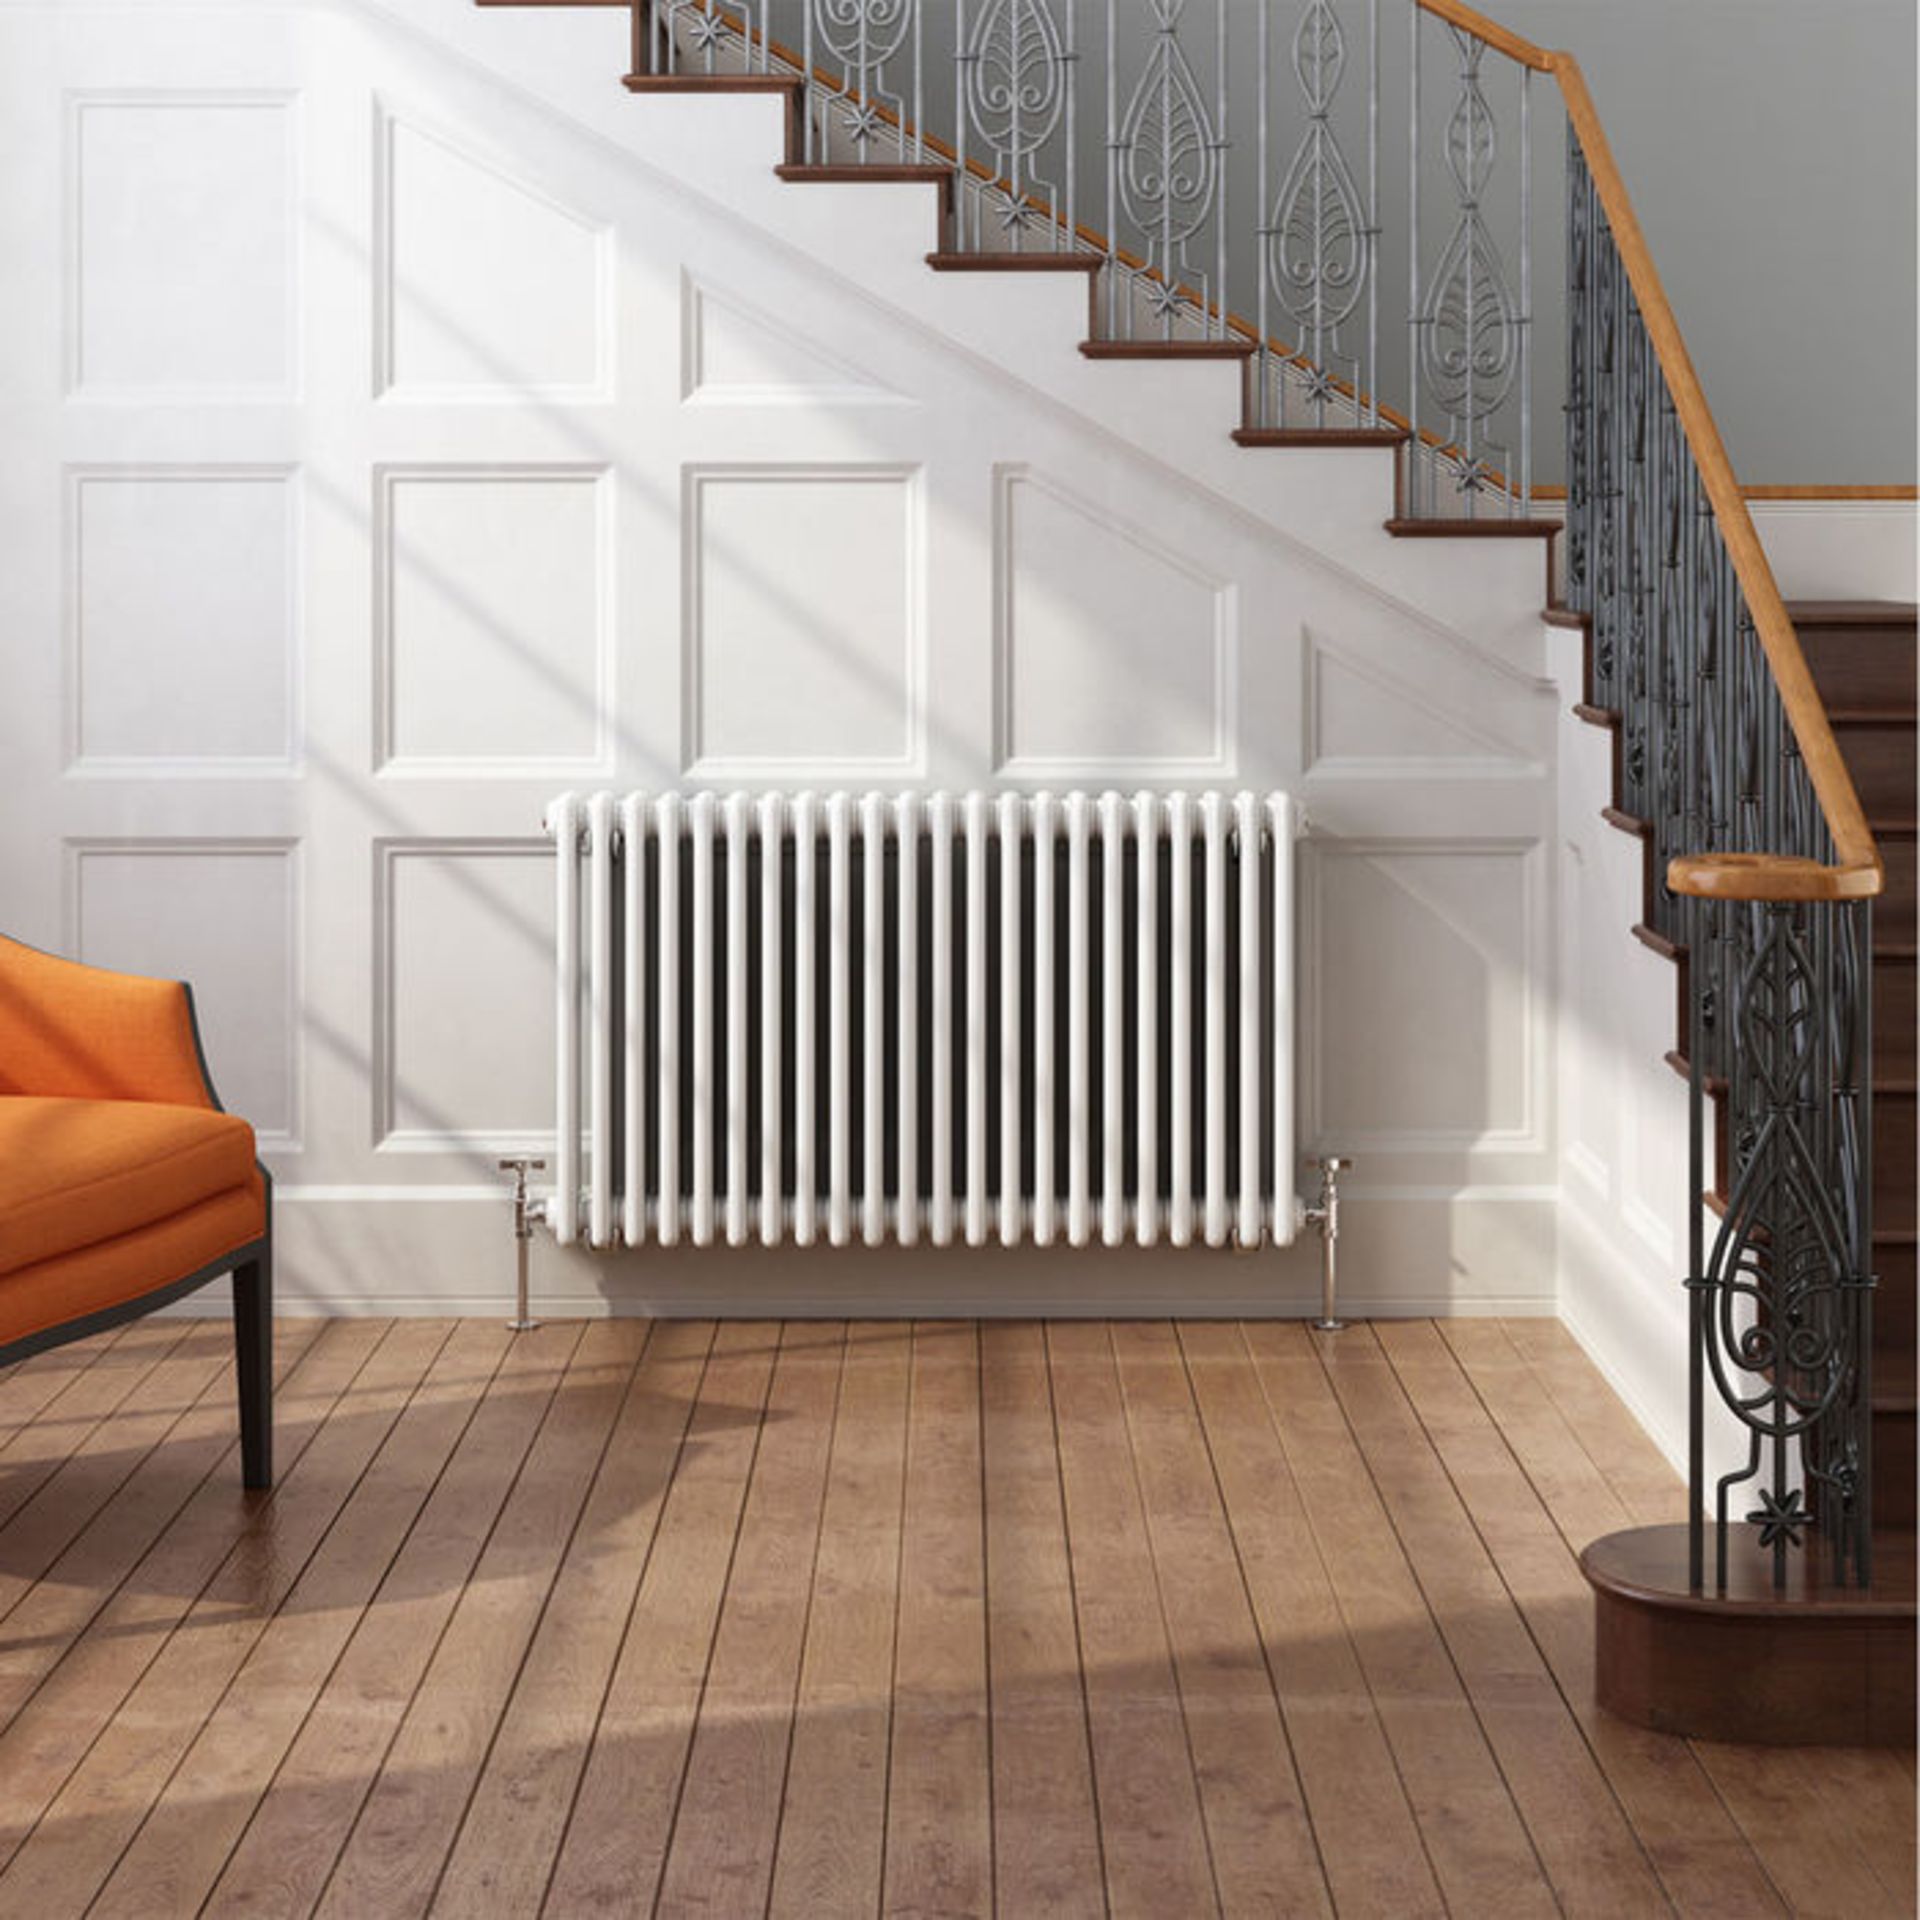 (AL216) 600x1008mm White Double Panel Horizontal Colosseum Traditional Radiator. RRP £439.99. Made - Image 2 of 4